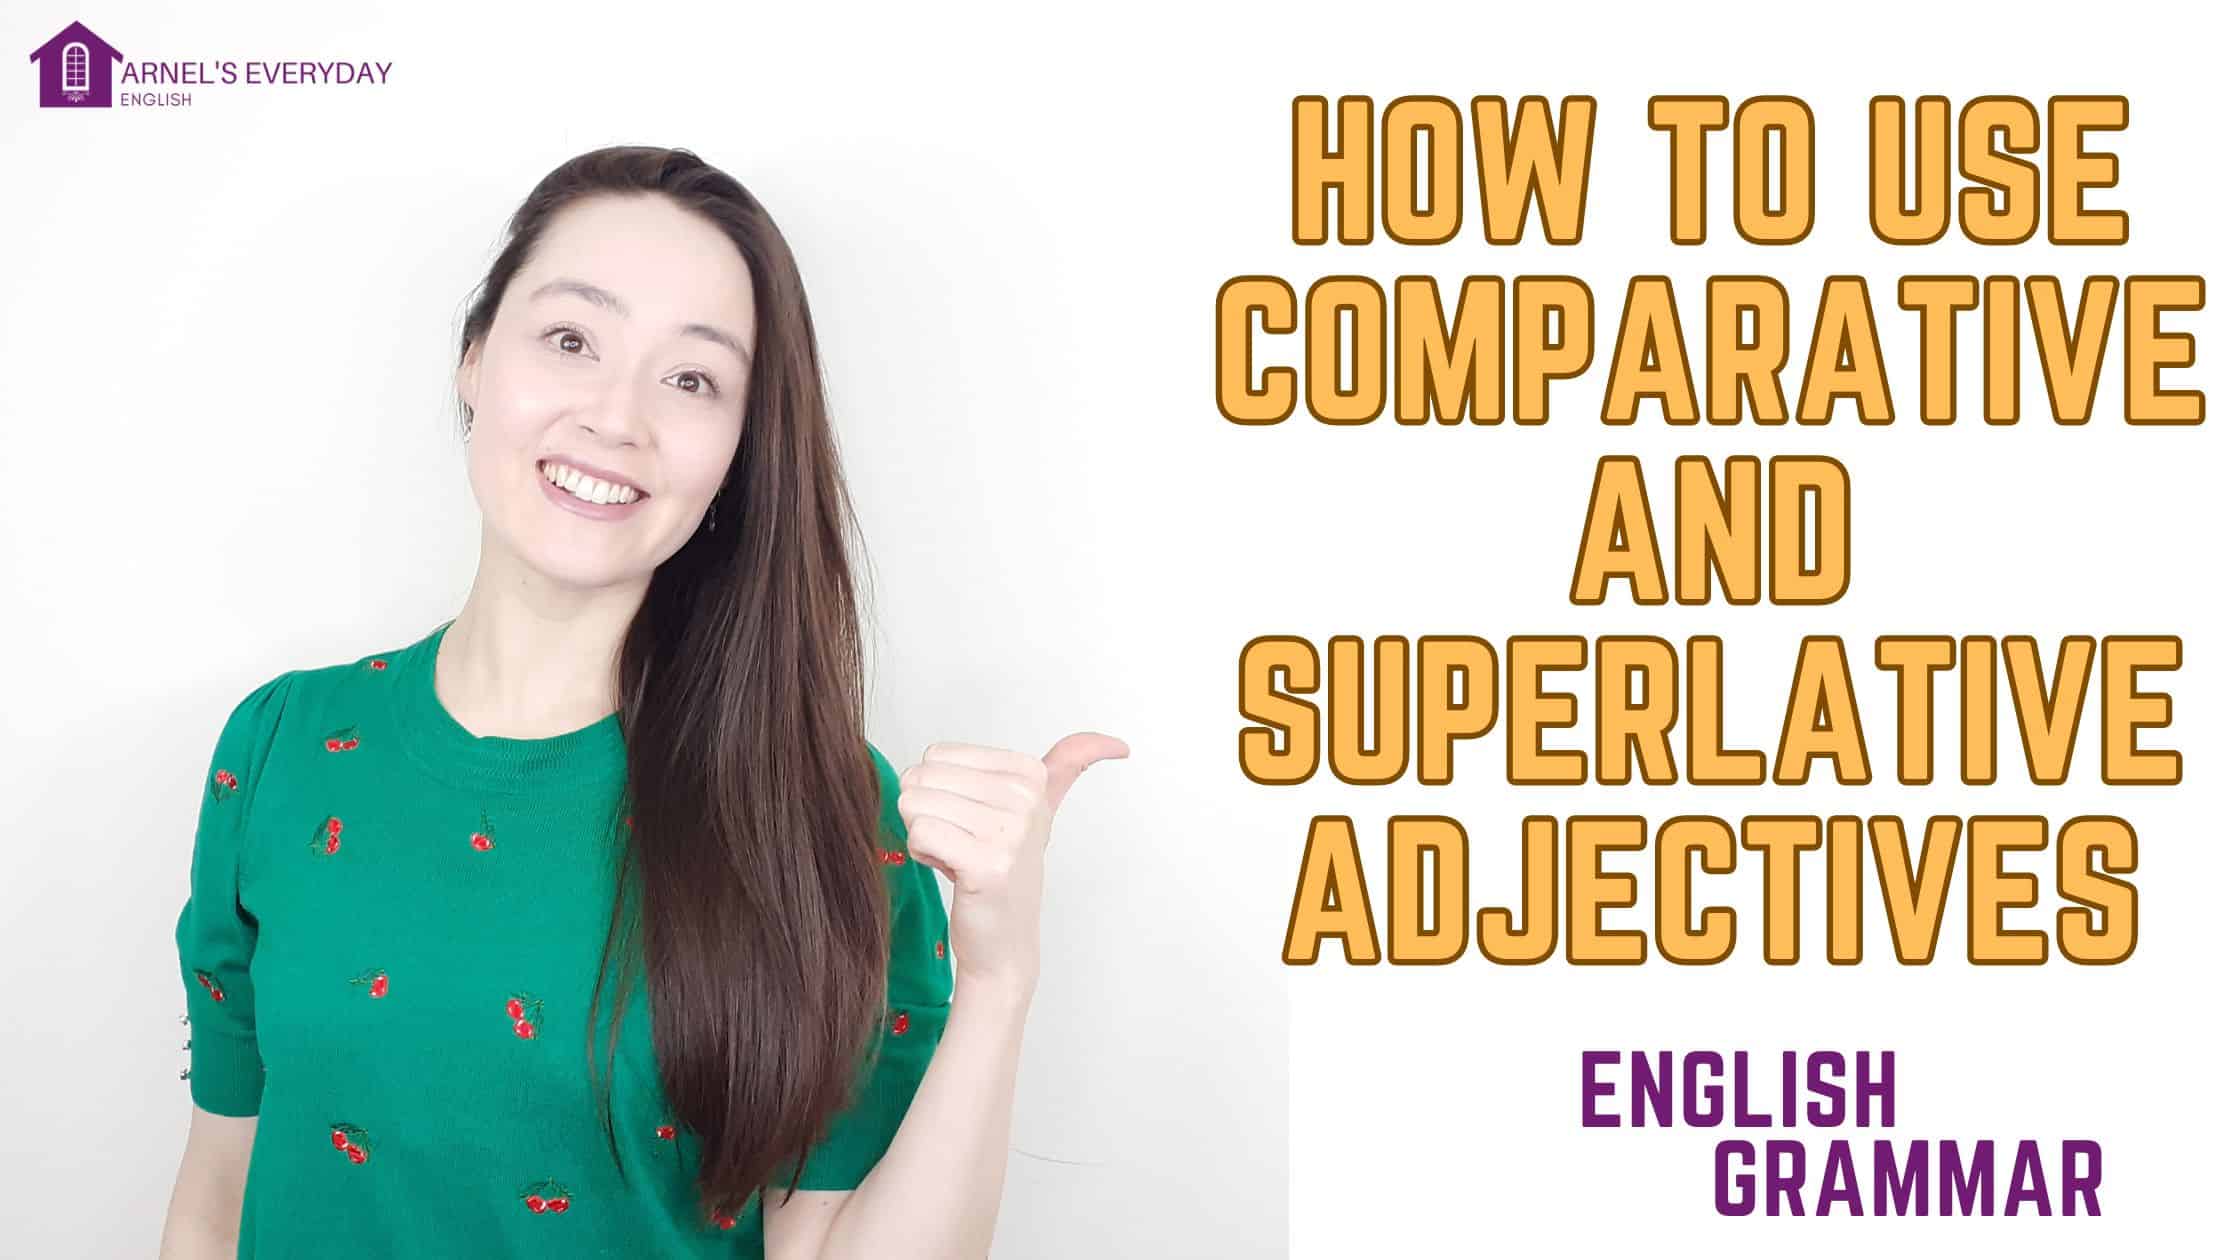 How To Use Comparative and Superlative Adjectives